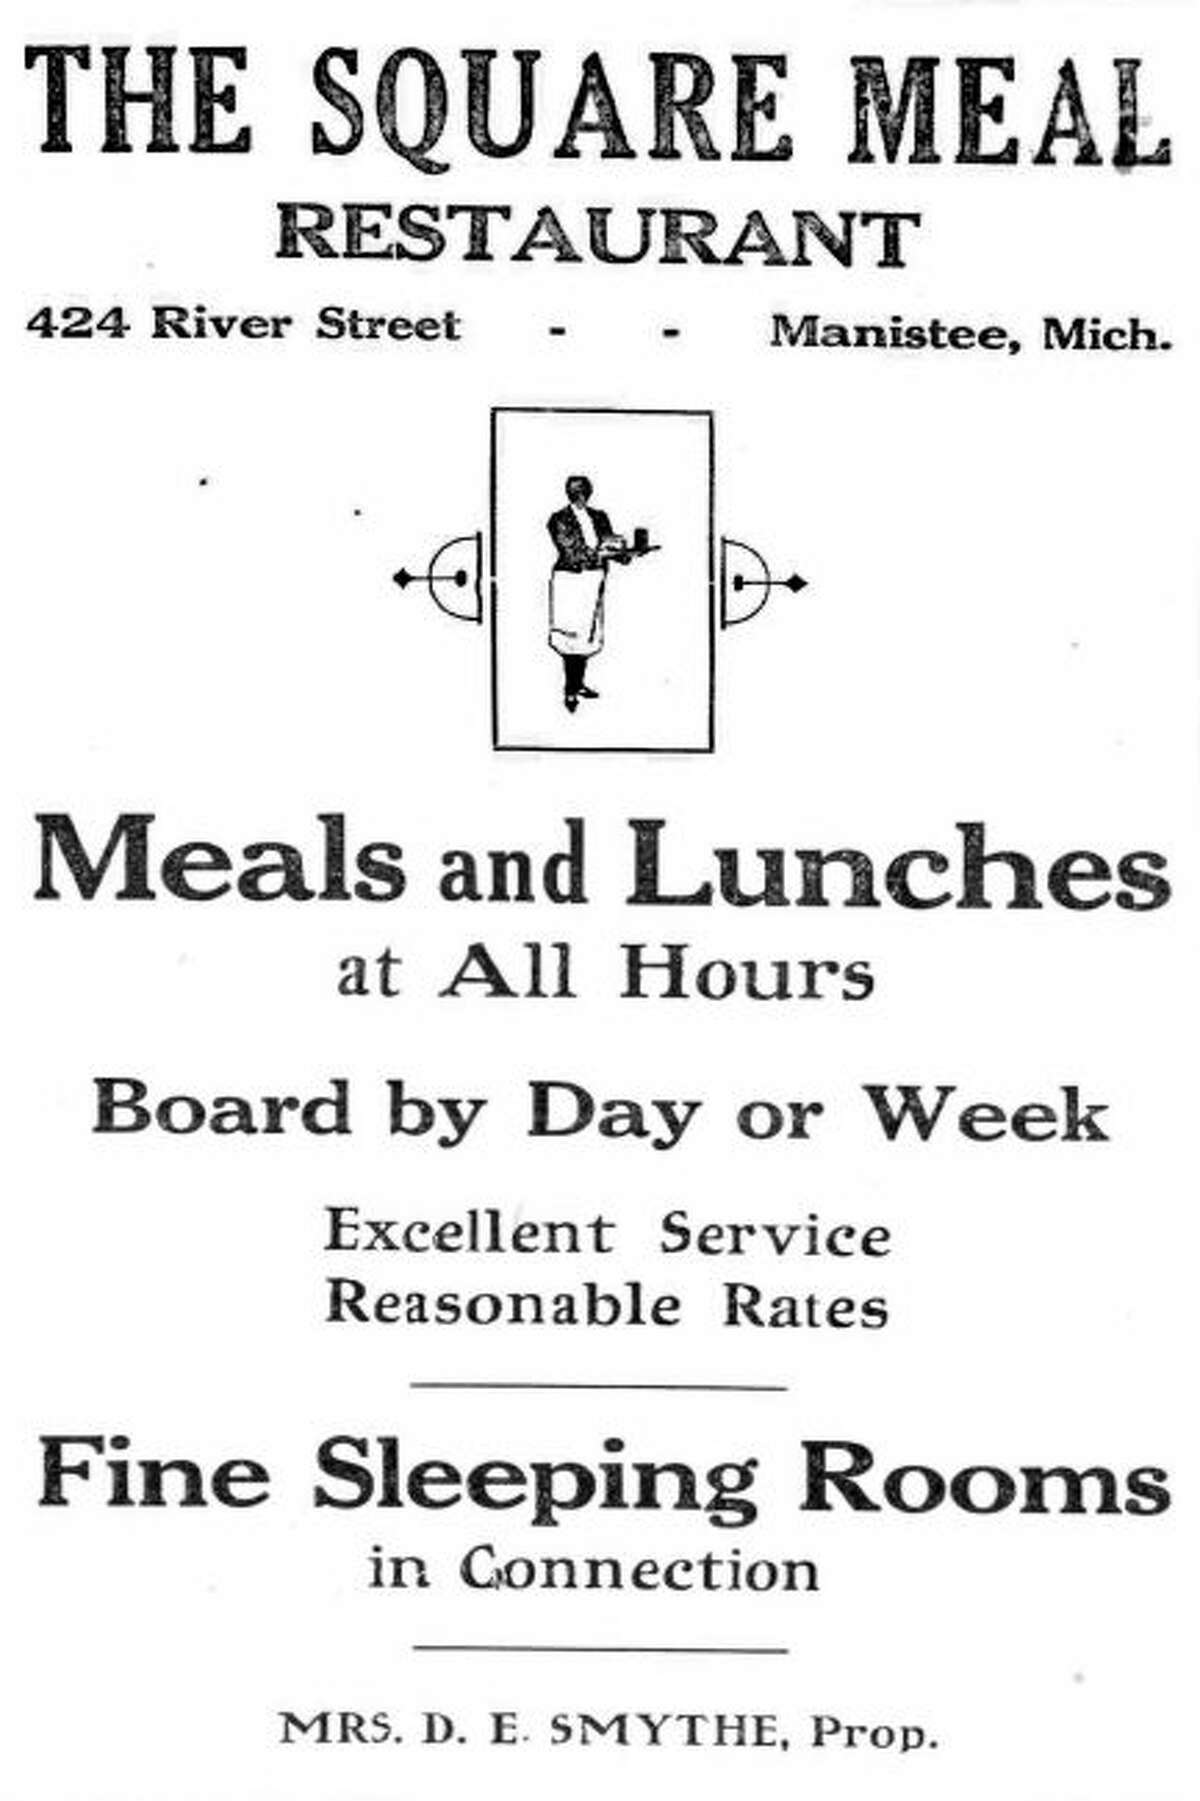 An advertisement for the Square Meal Restaurant published in the Manistee Picture Press magazine circa 1915.